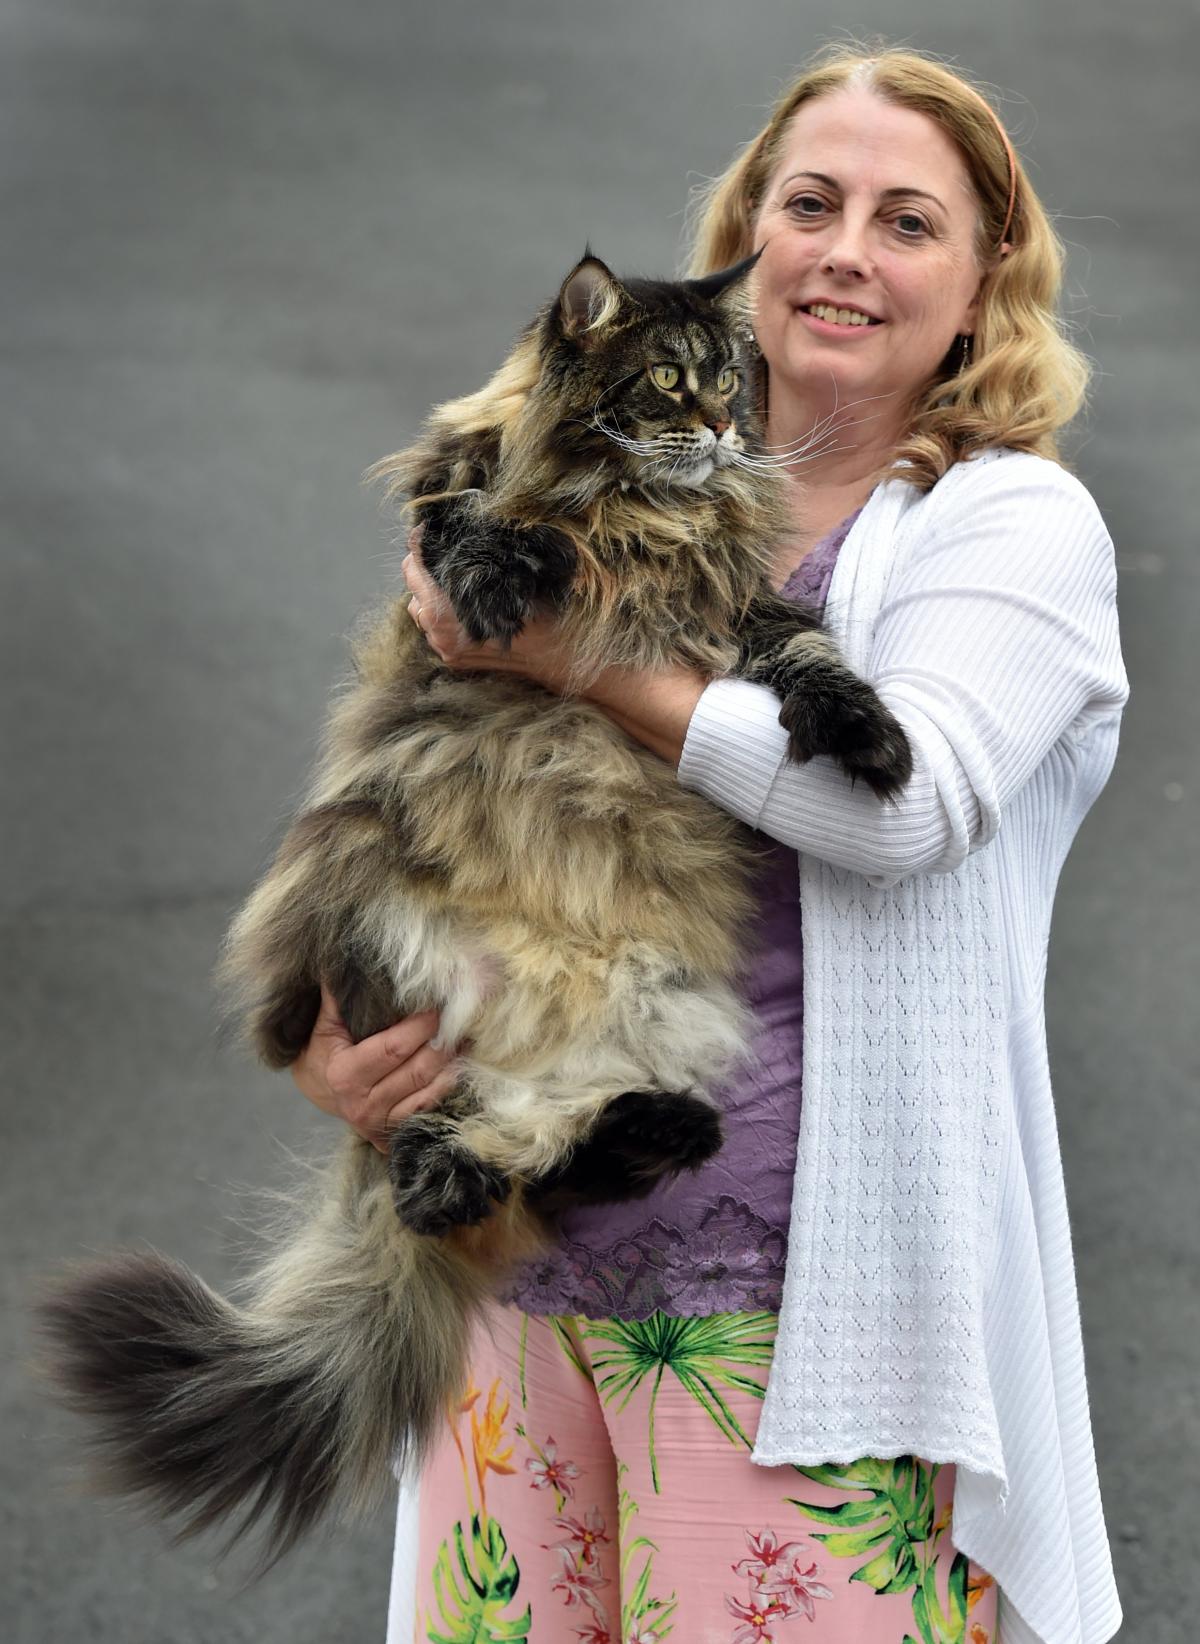 Plenty of variety at cat show | Otago Daily Times Online News